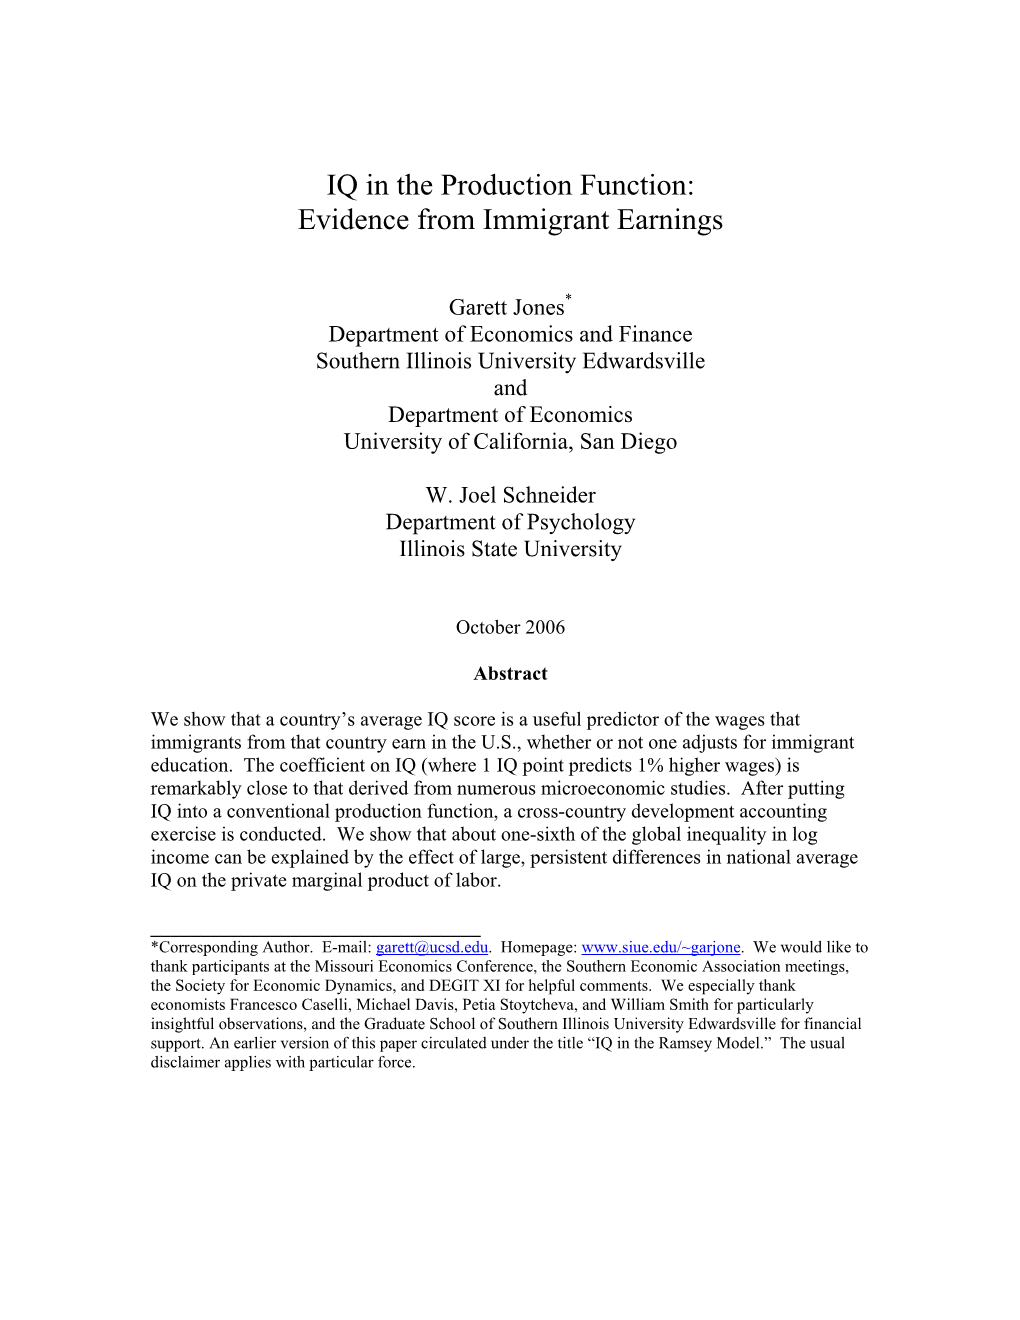 IQ in the Production Function: Evidence from Immigrant Earnings